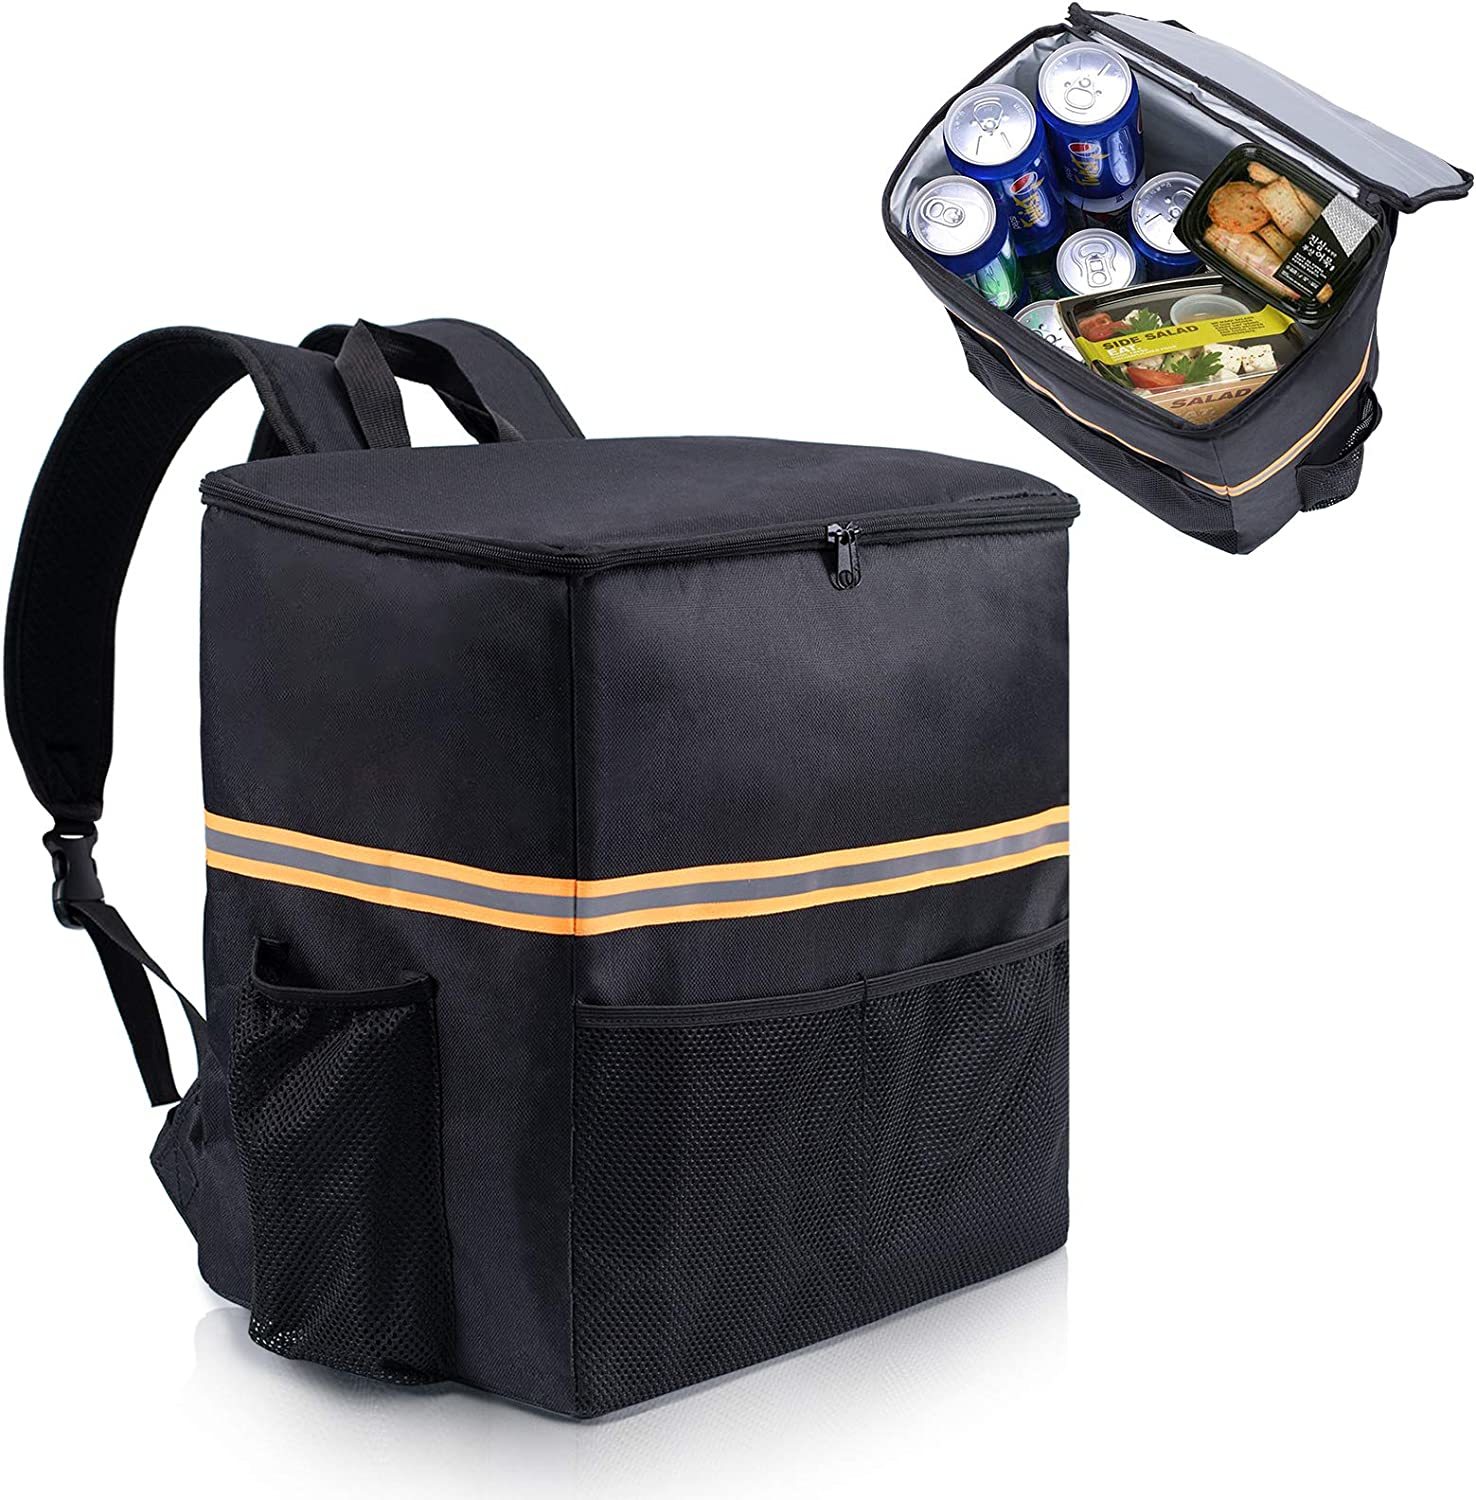 Primary image for Large Thermal Pizza Delivery Bag With Cup Holder Waterproof Insulated Commercial